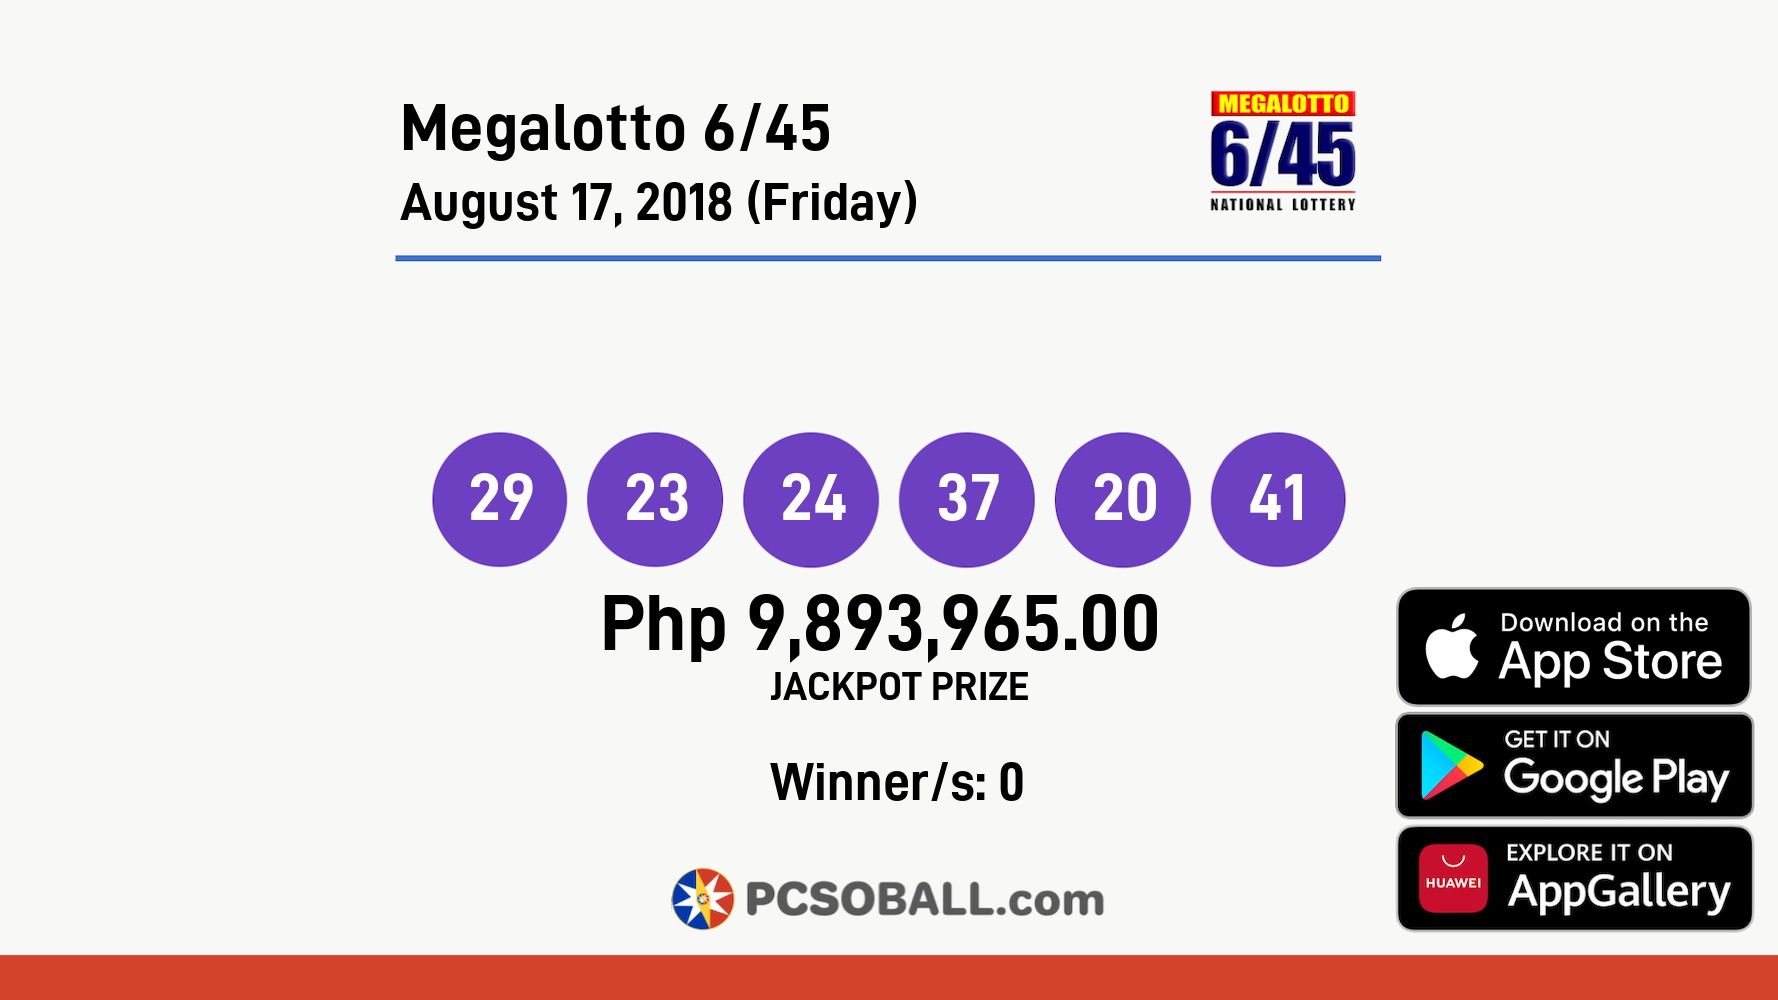 Megalotto 6/45 August 17, 2018 (Friday) Result